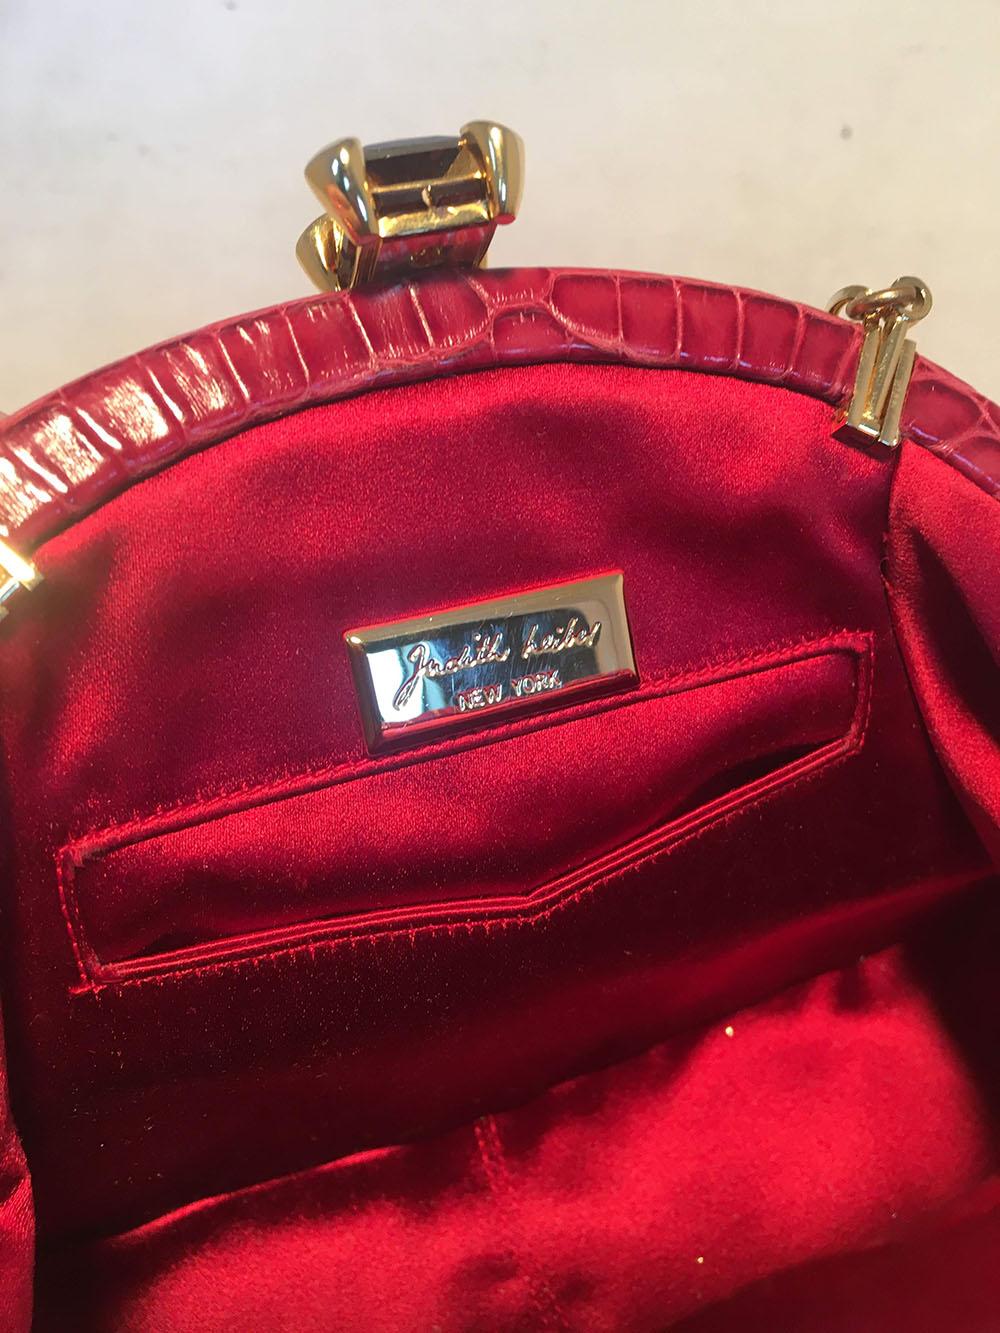 Judith Leiber Small Red Alligator Handbag In Excellent Condition For Sale In Philadelphia, PA